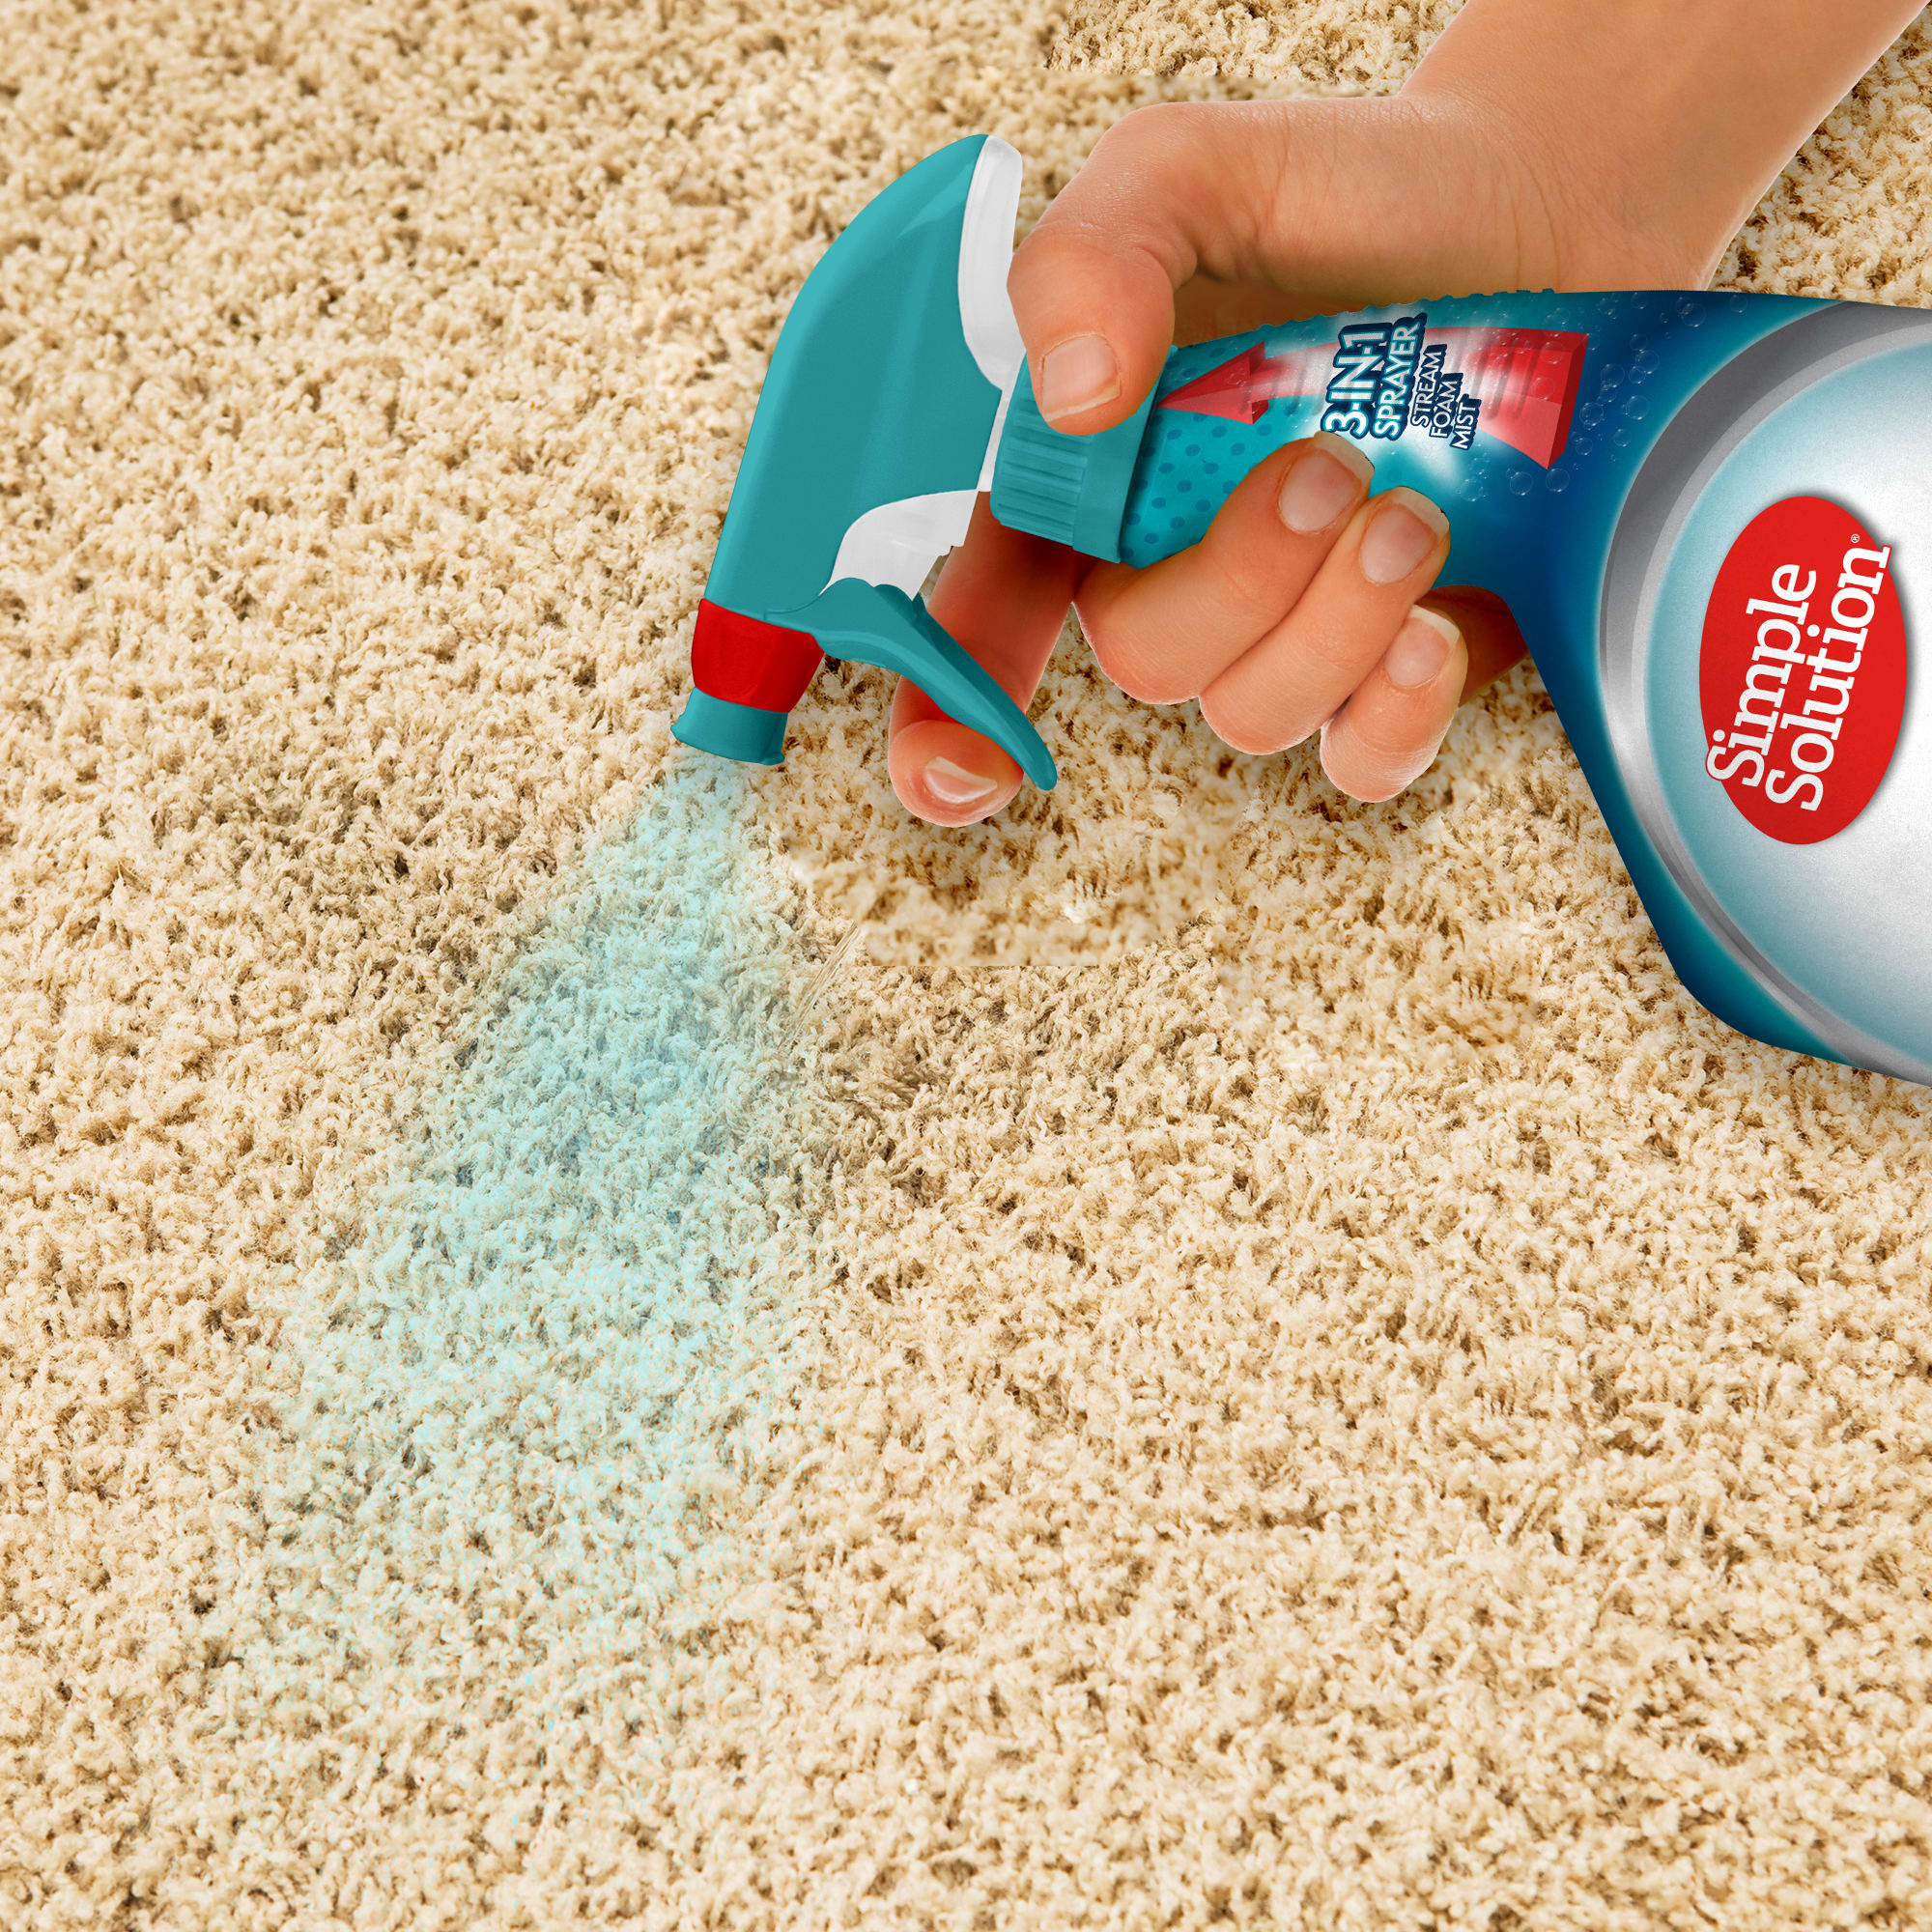 Pet cleaner. Clean 3в1. Pet Stain Odor. Stain Odor Remover Carpet. Extreme Stain Odor Remover.